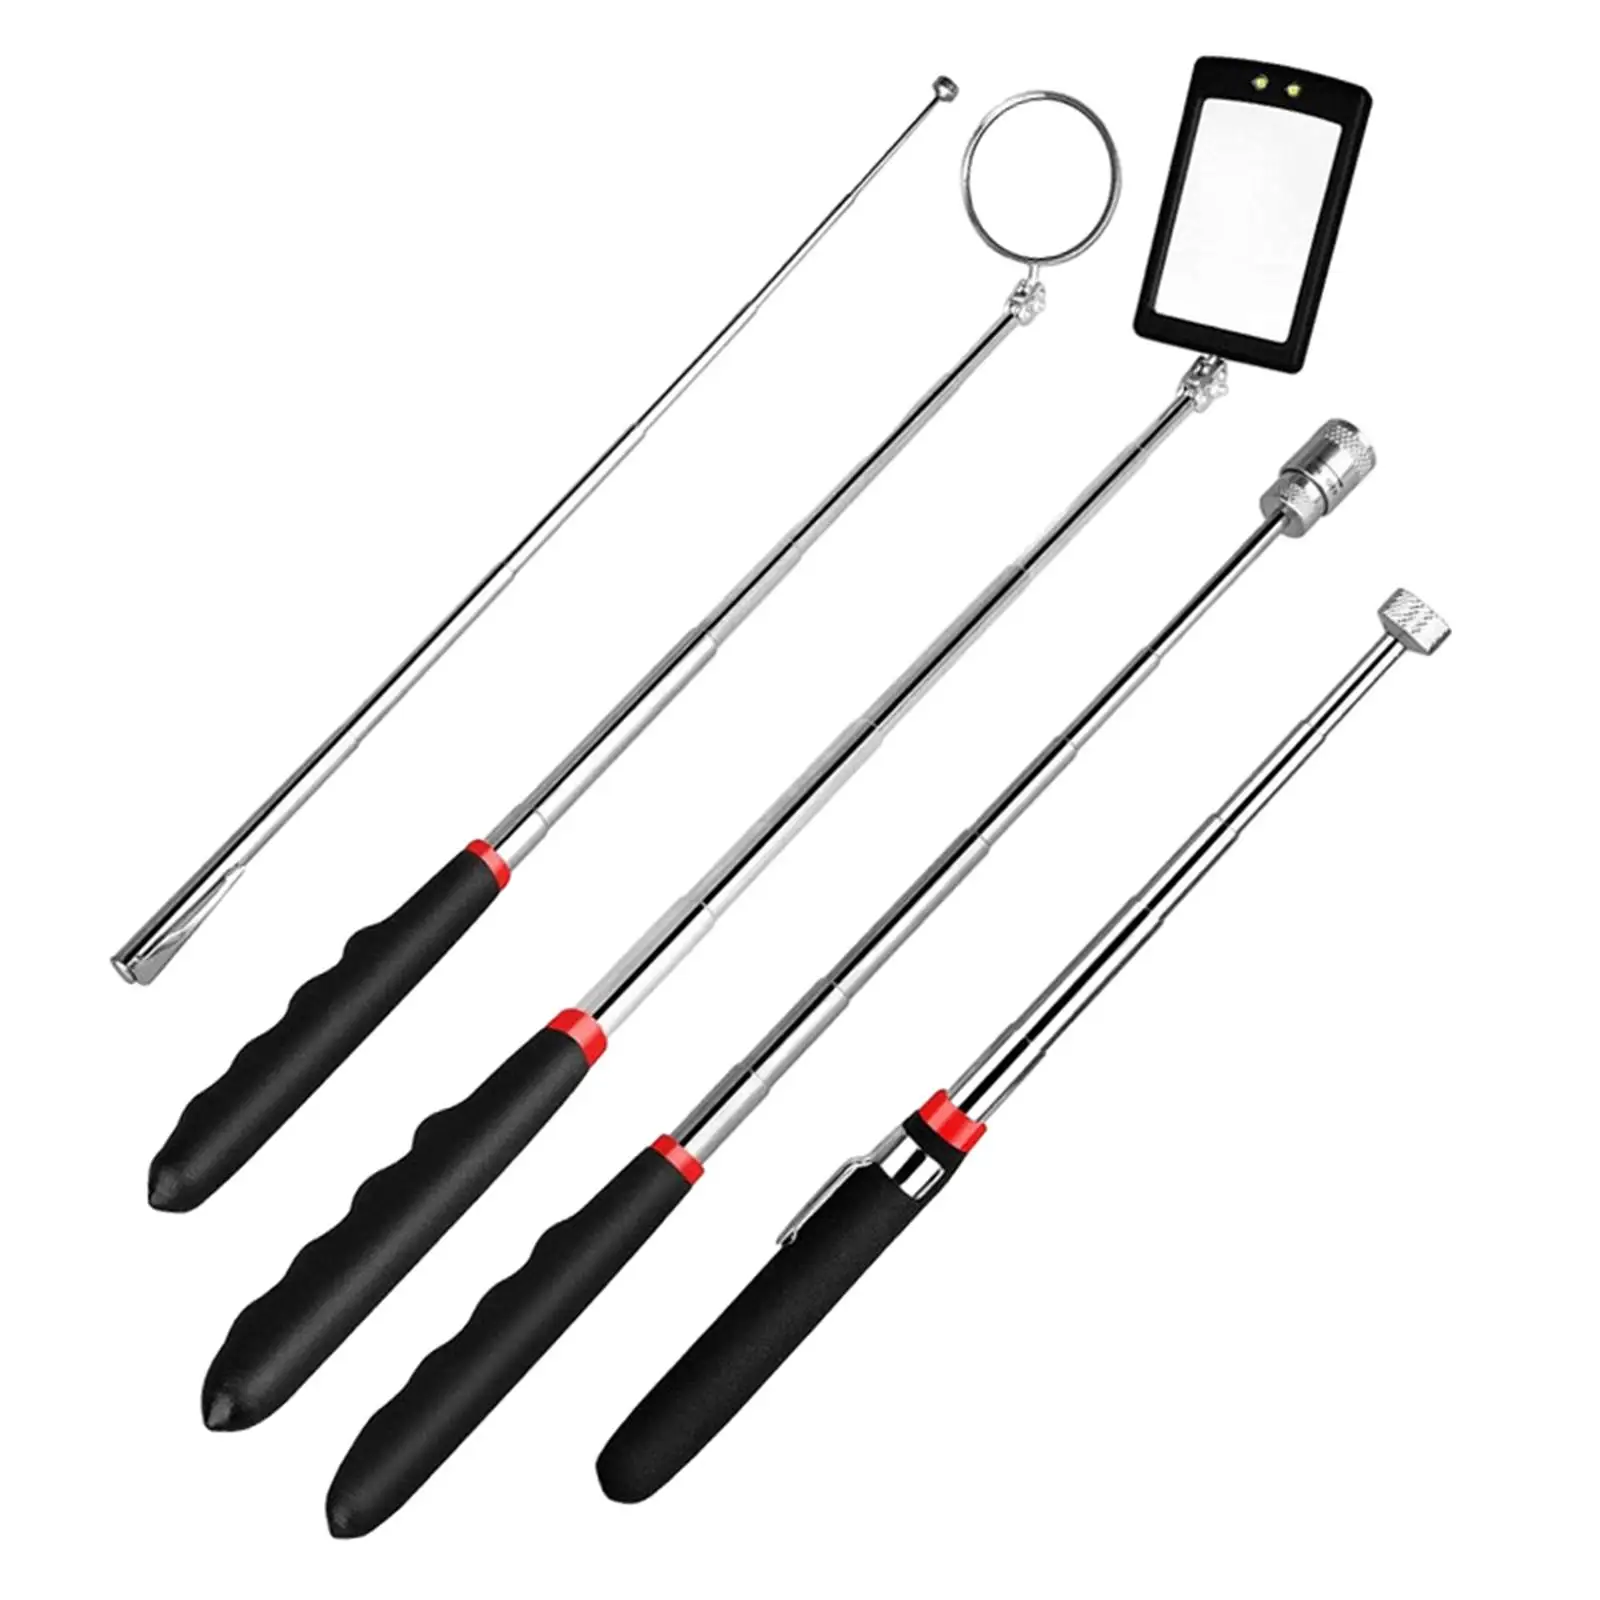 5Pcs Magnetic Telescoping Pick up Tool Kit Lightweight Battery Powered Sturdy